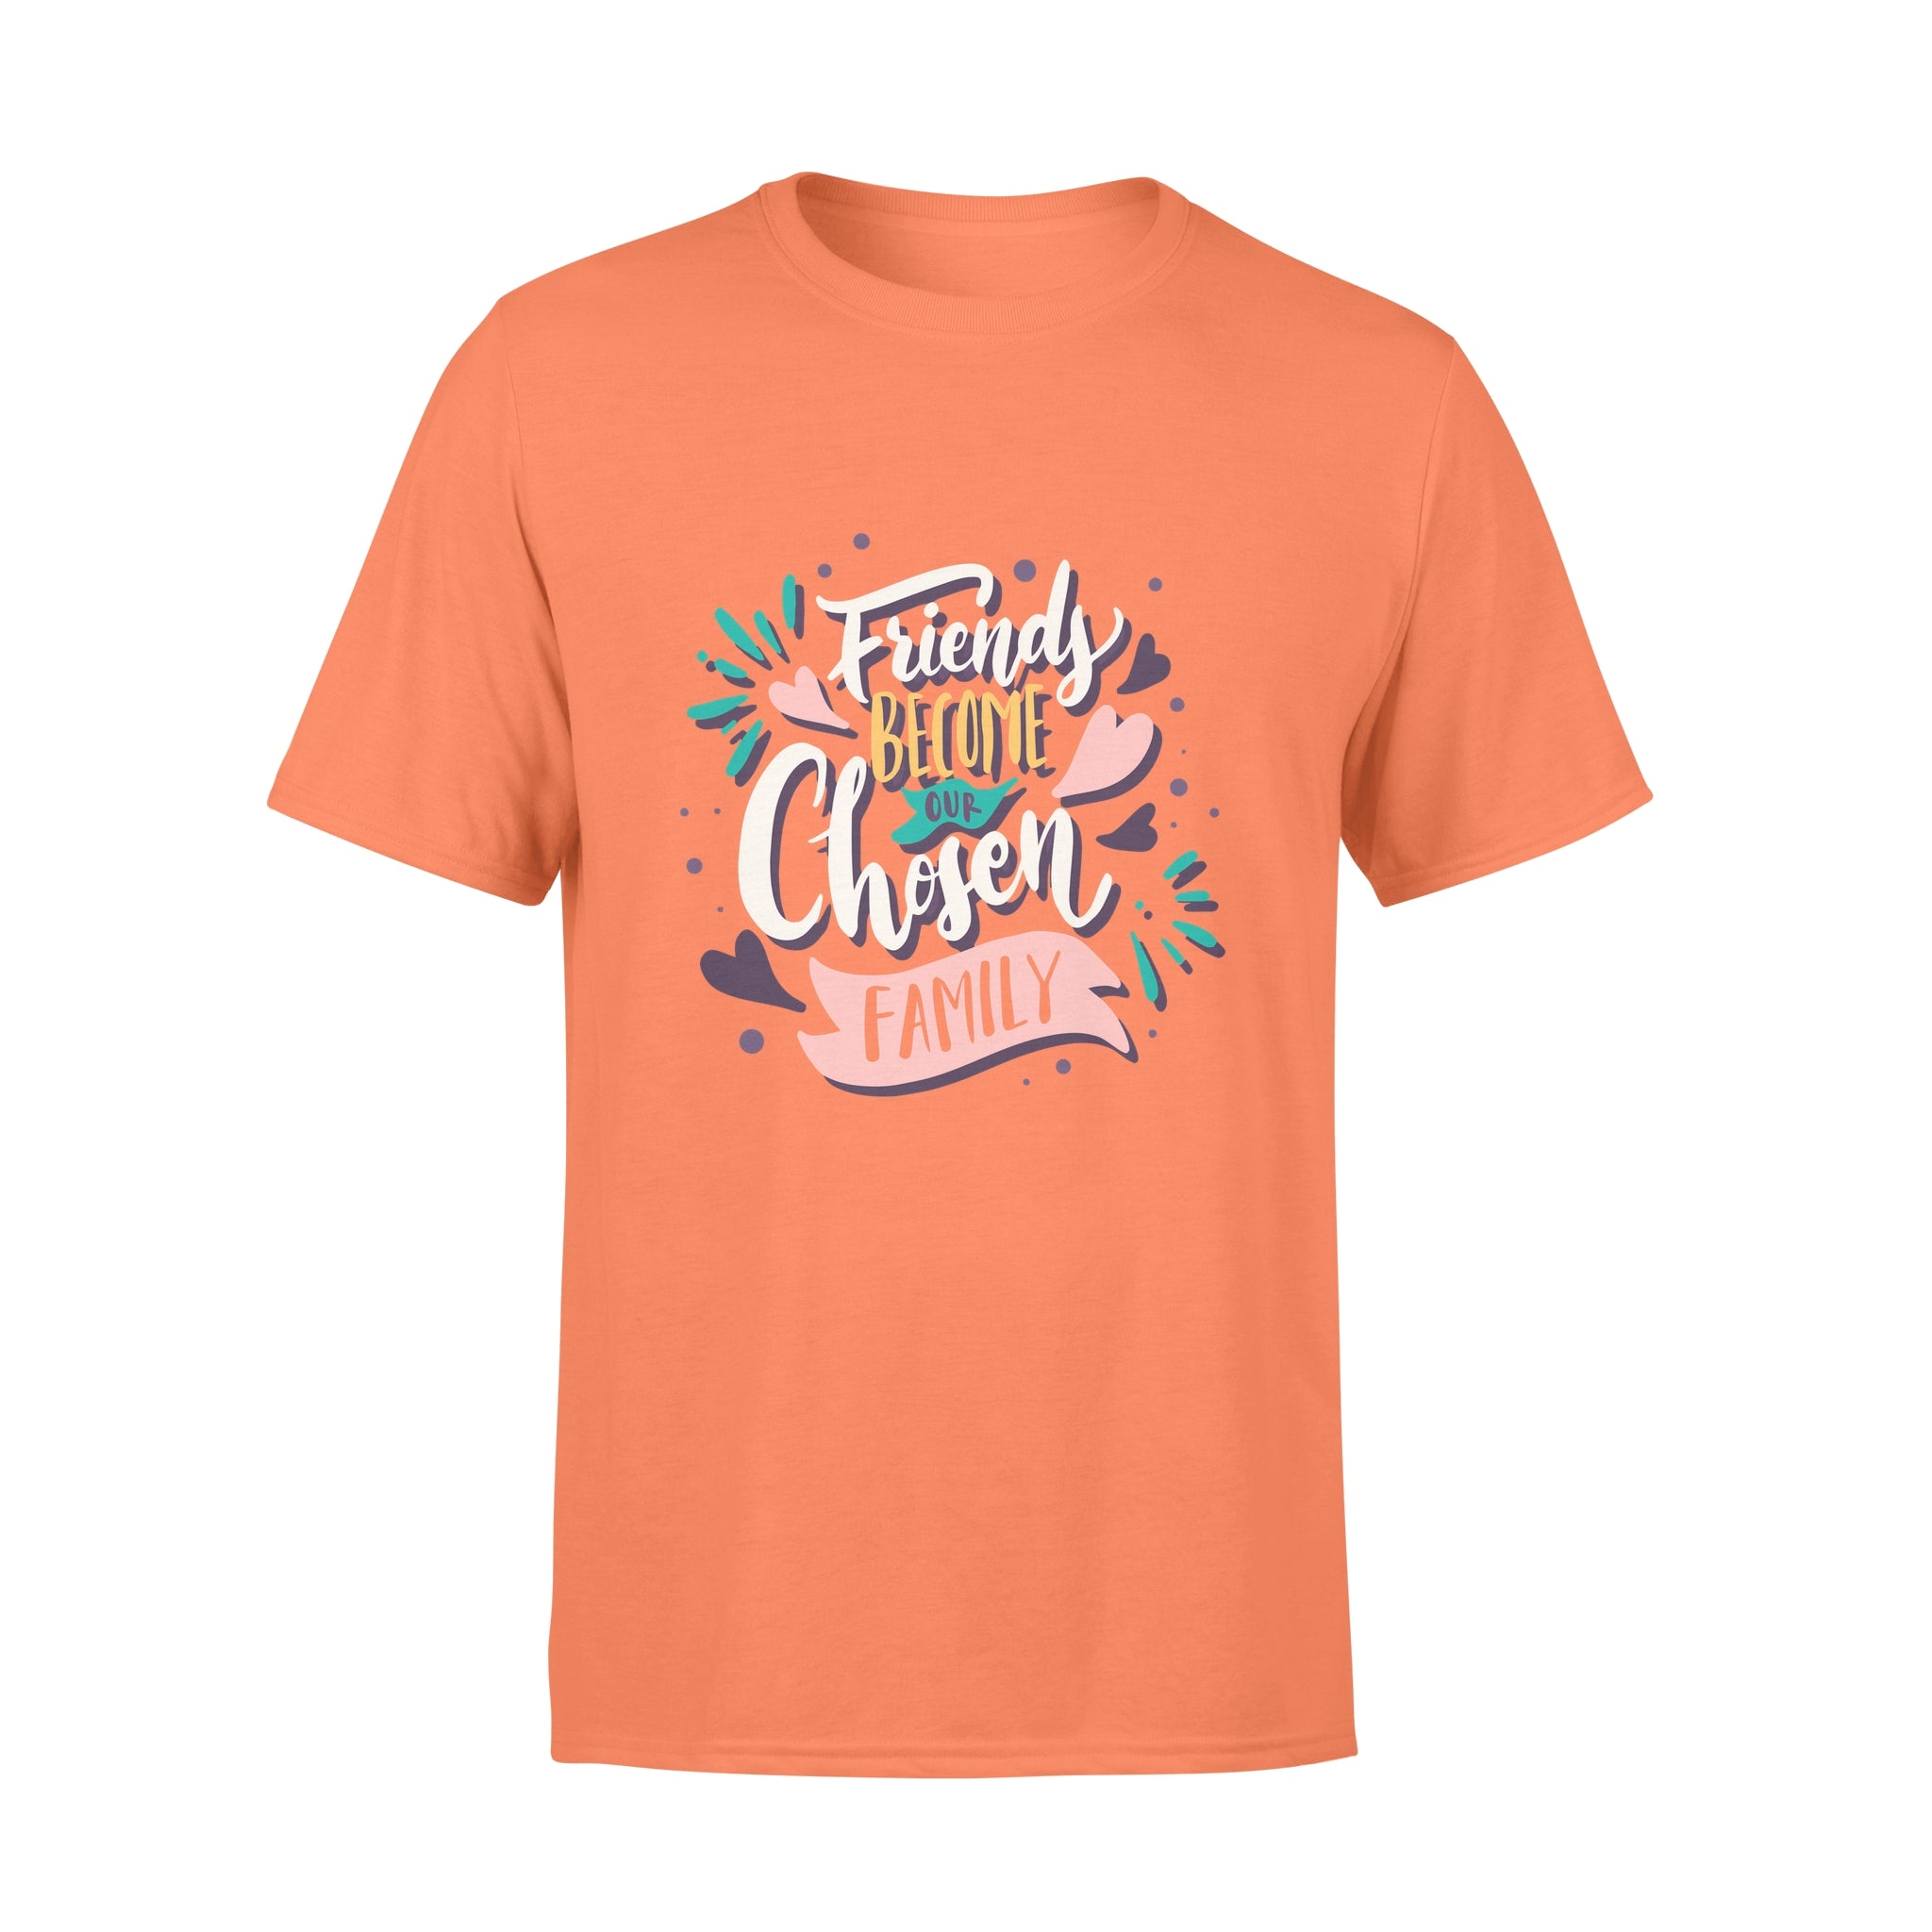 Friend Become Our Chosen Family - T-shirt